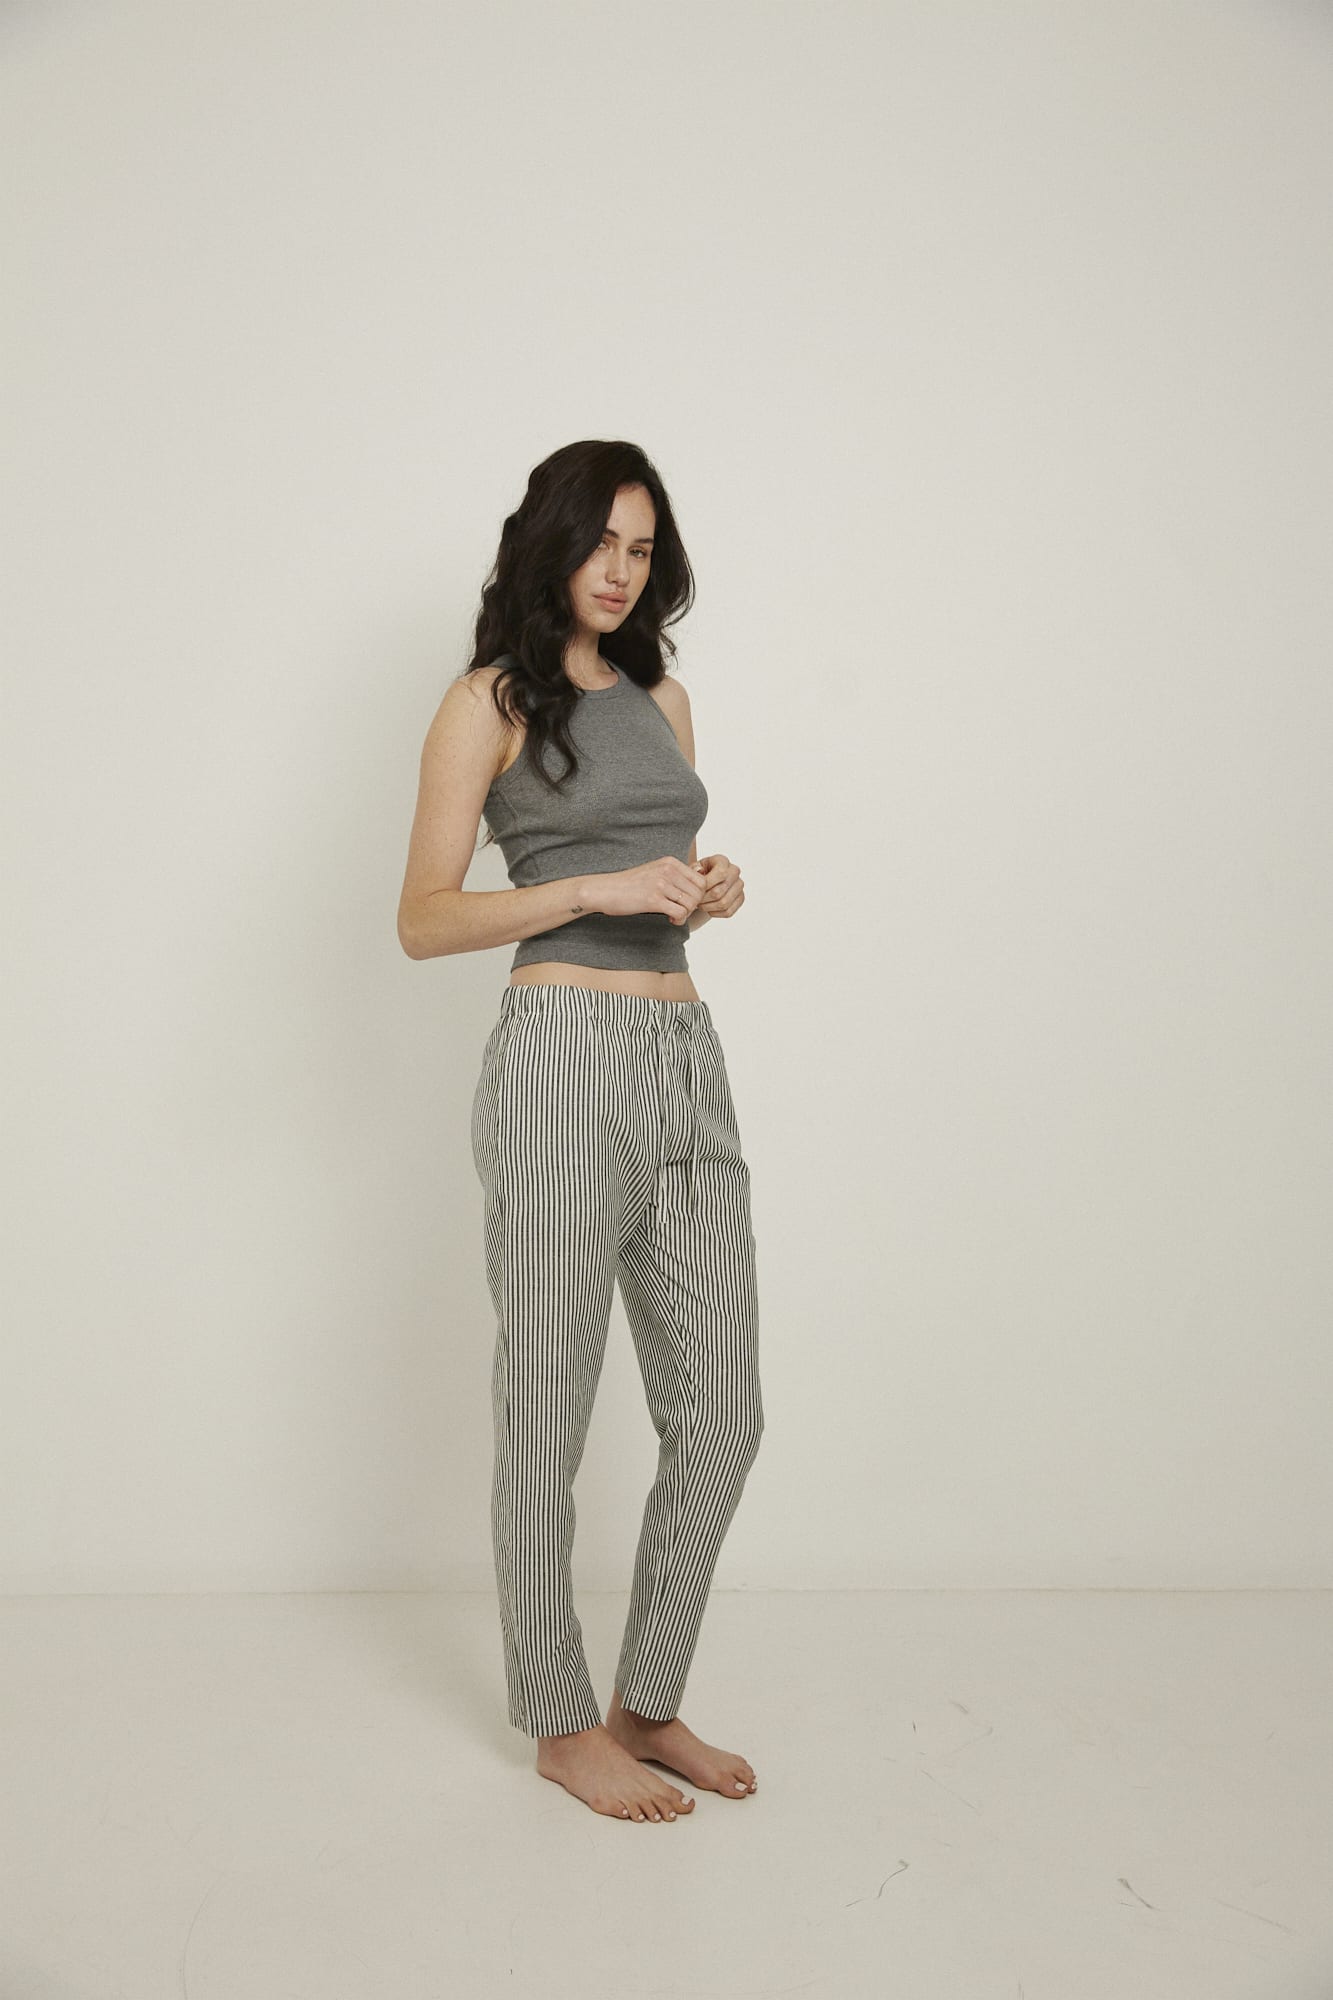 Women’s pyjama pant.  Made from an organic cotton and linen blend, in a black and white stripe.  These pants feature an elasticated waistband with a drawstring for comfort.